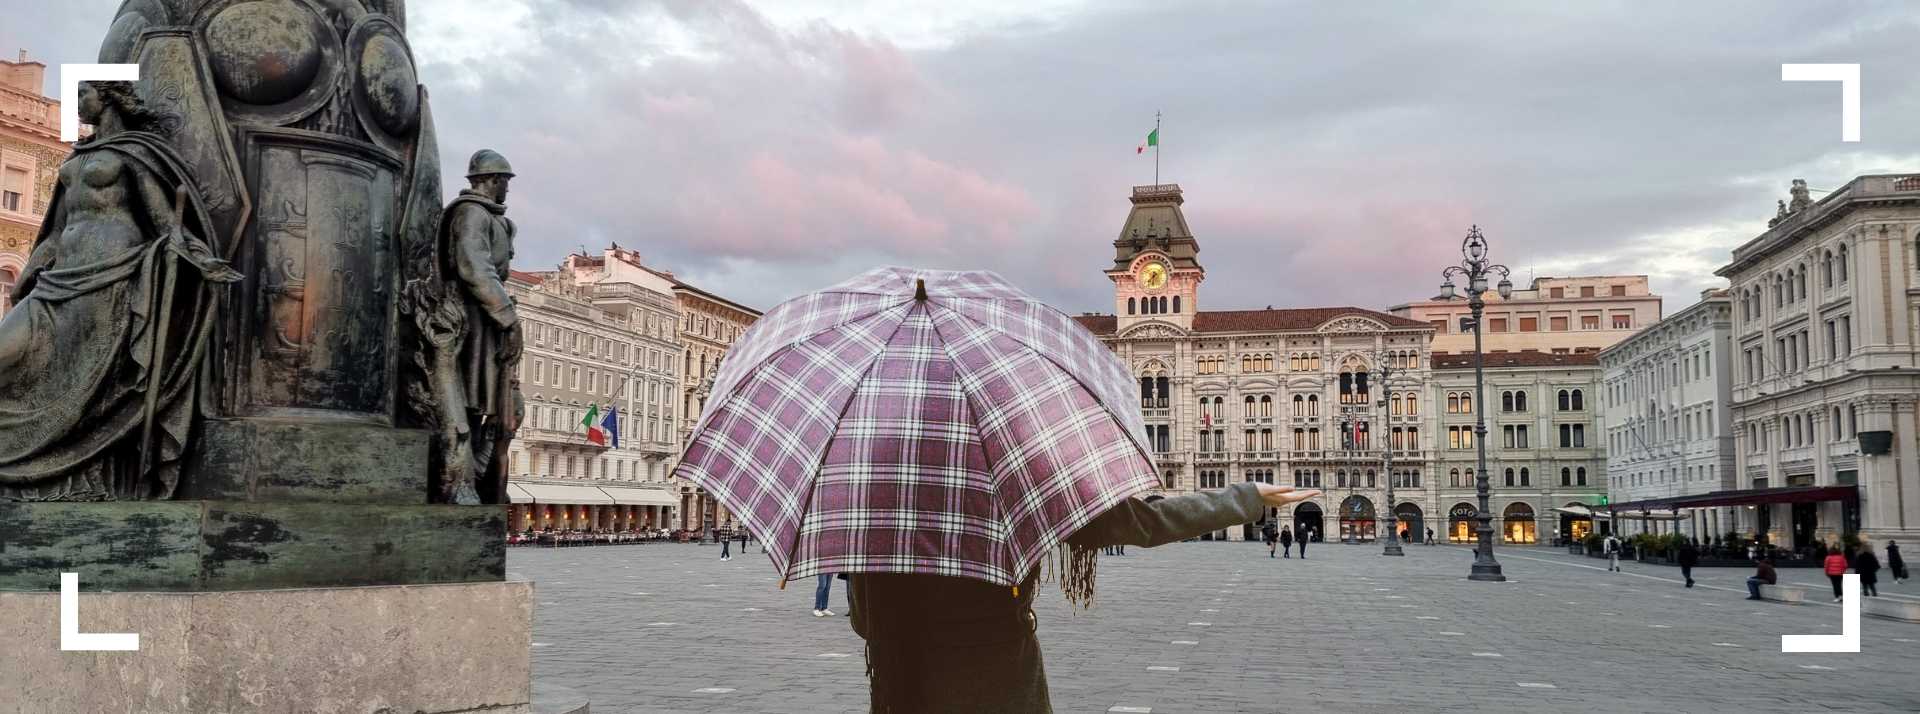 Discover what you can do on your next trip to Trieste Image